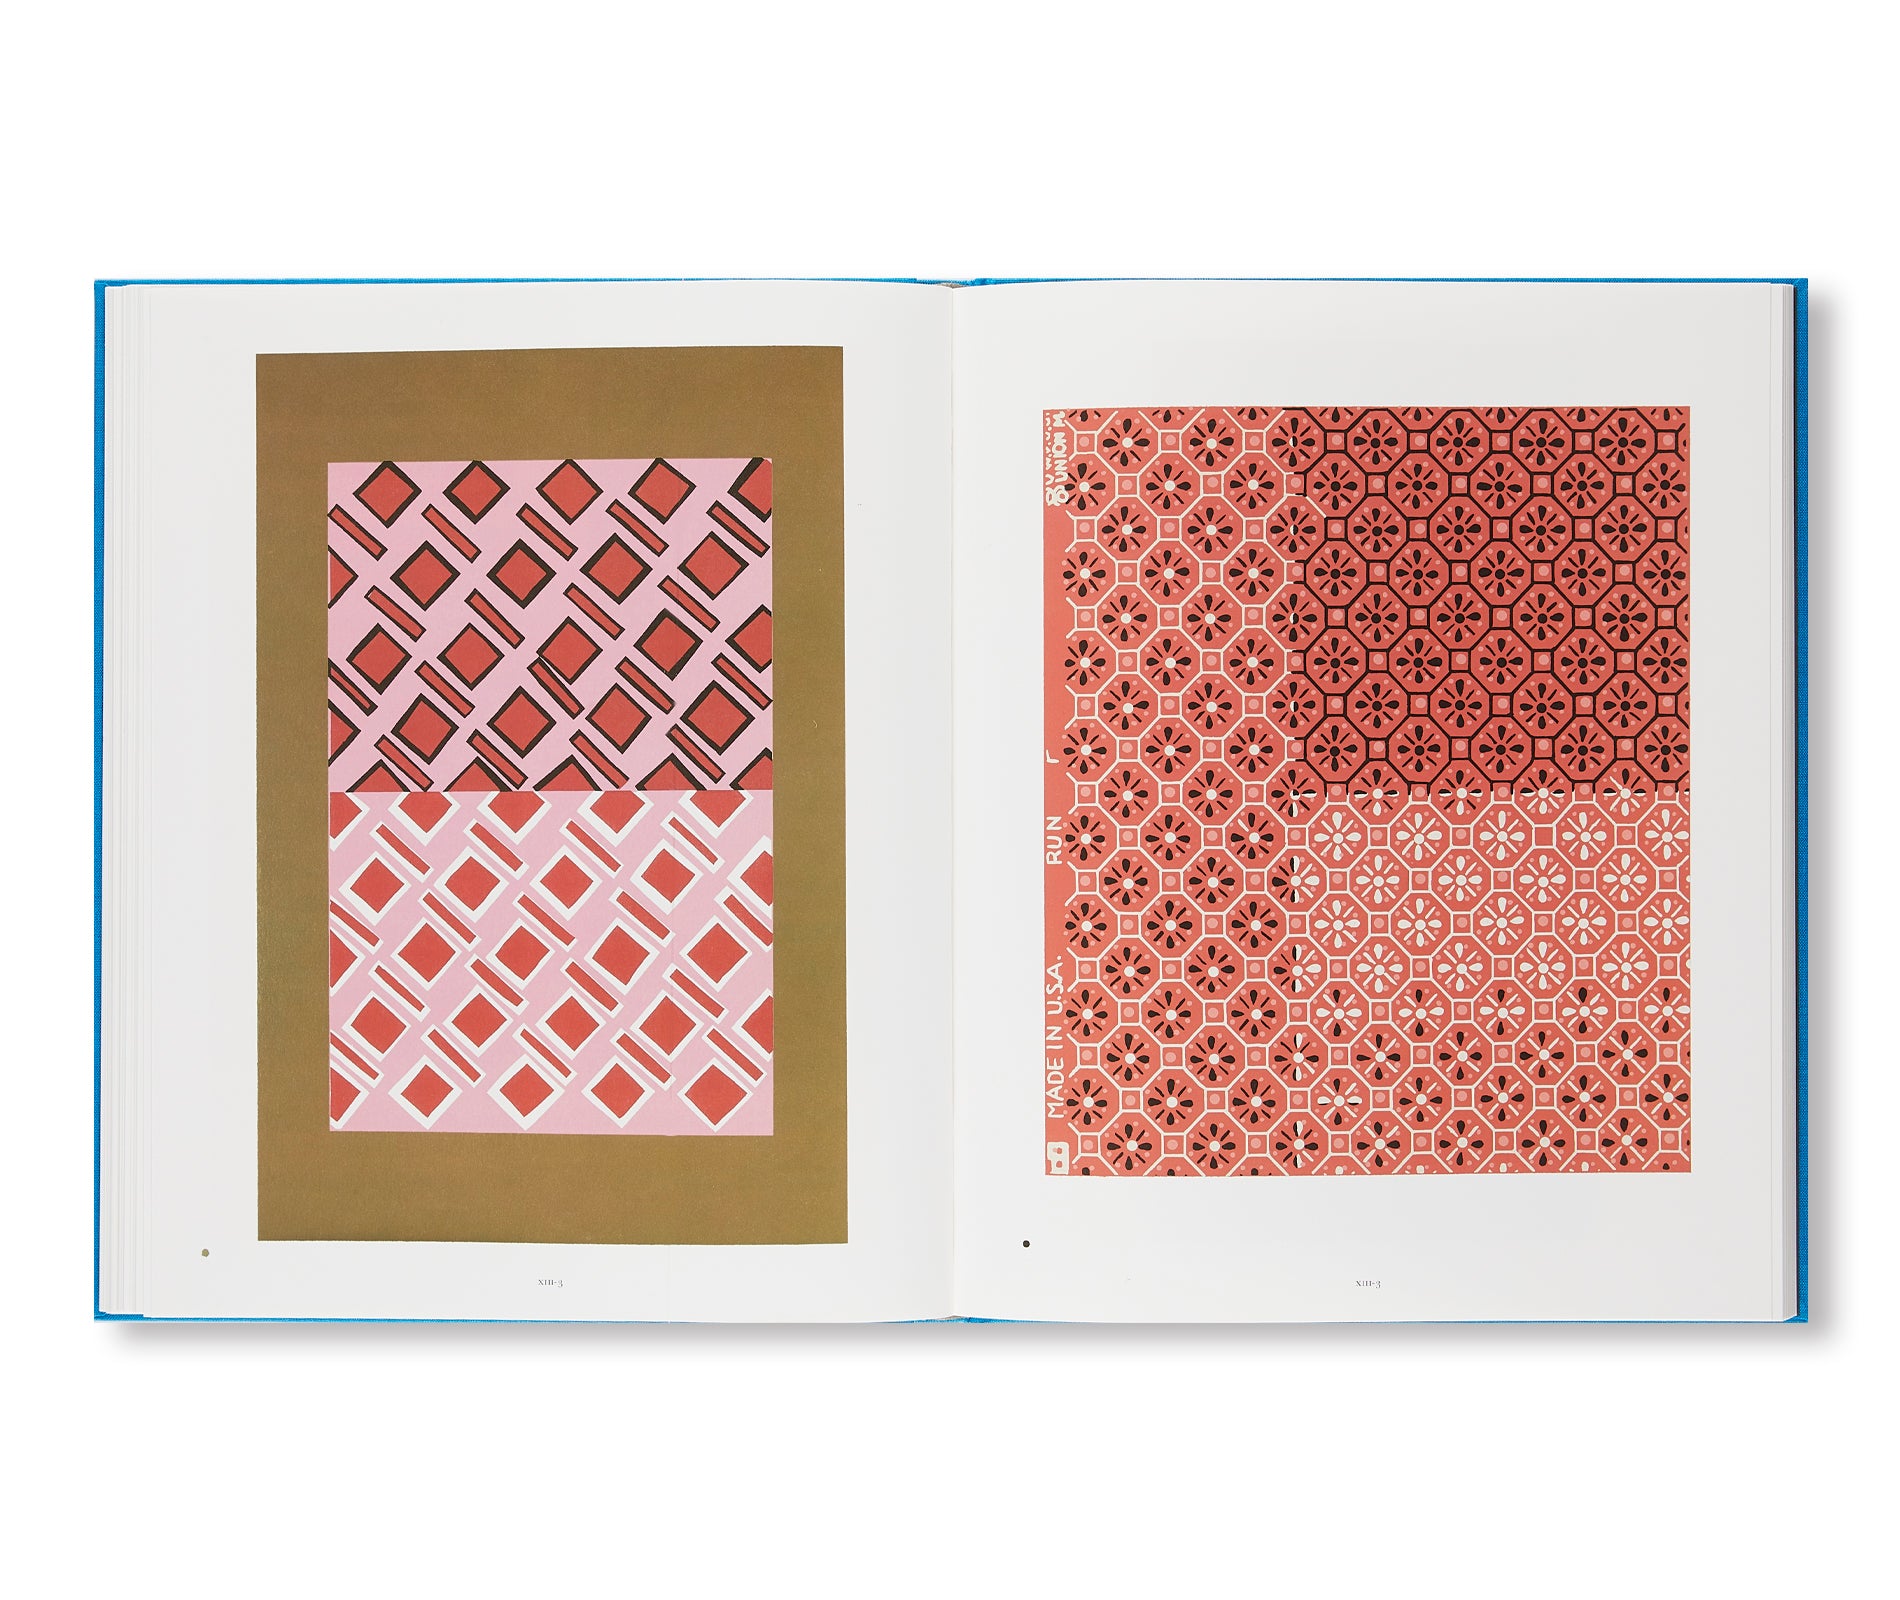 INTERACTION OF COLOR by Josef Albers [NEW COMPLETE EDITION]